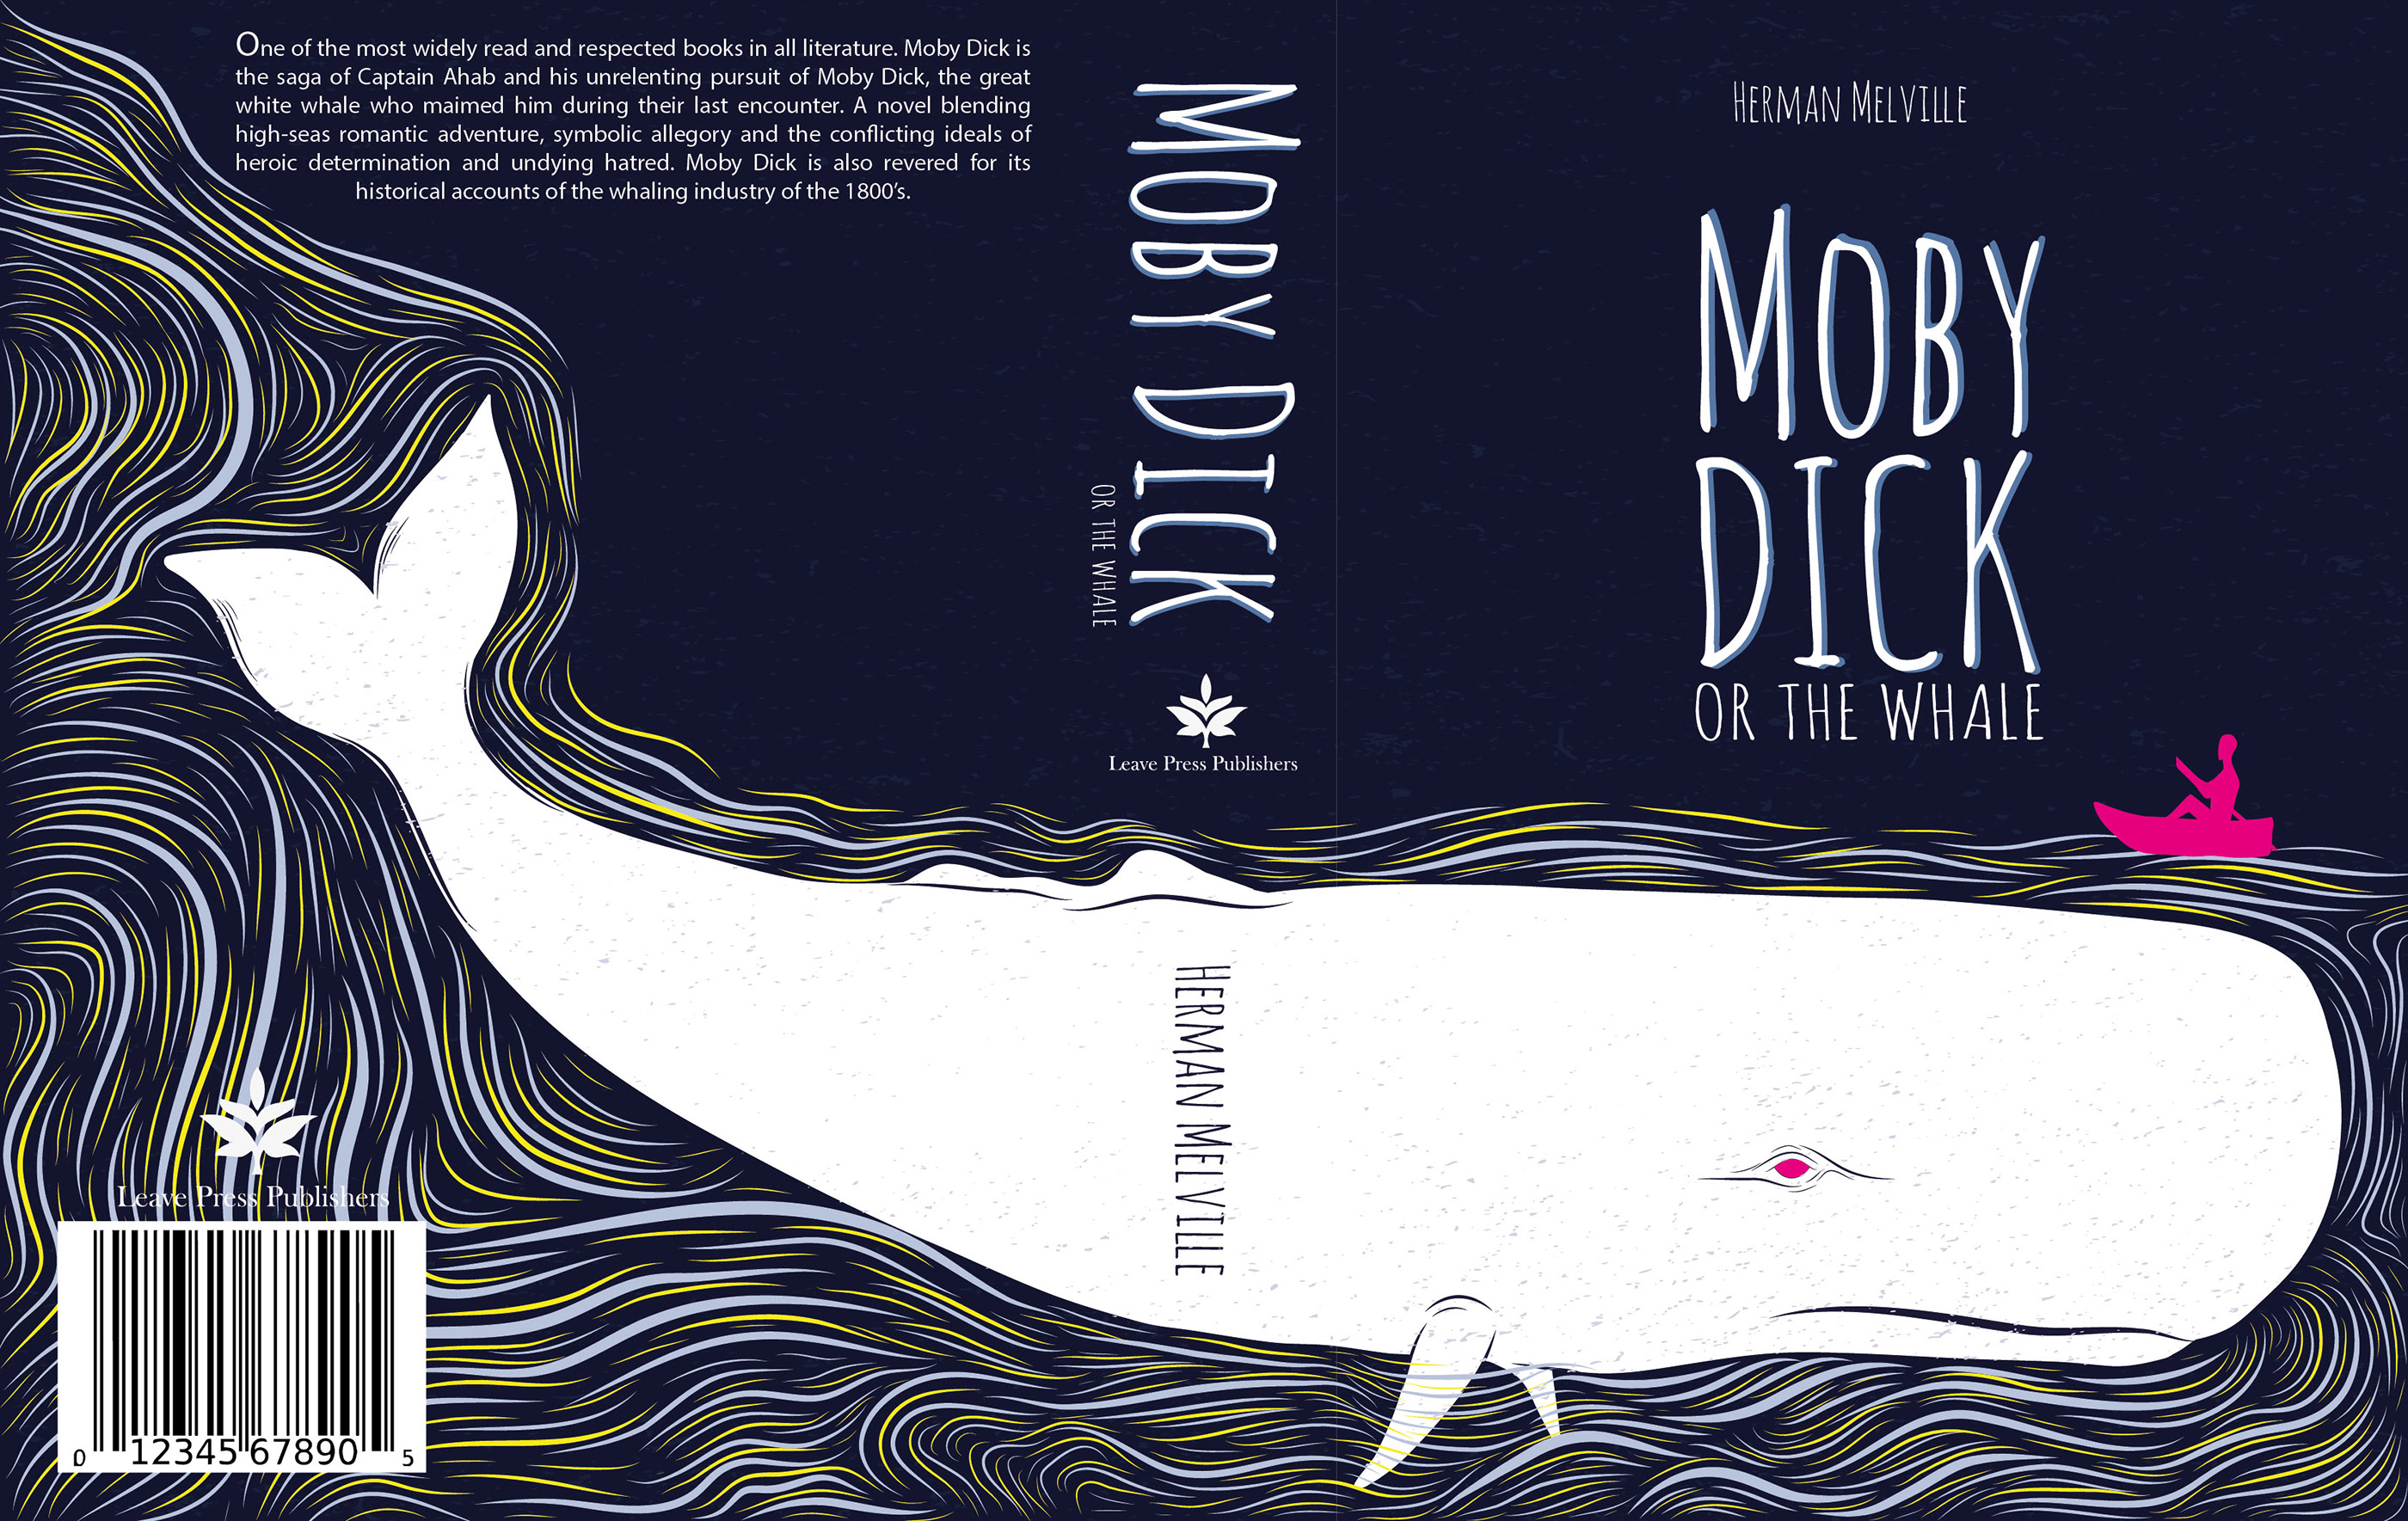 Moby dick conflict